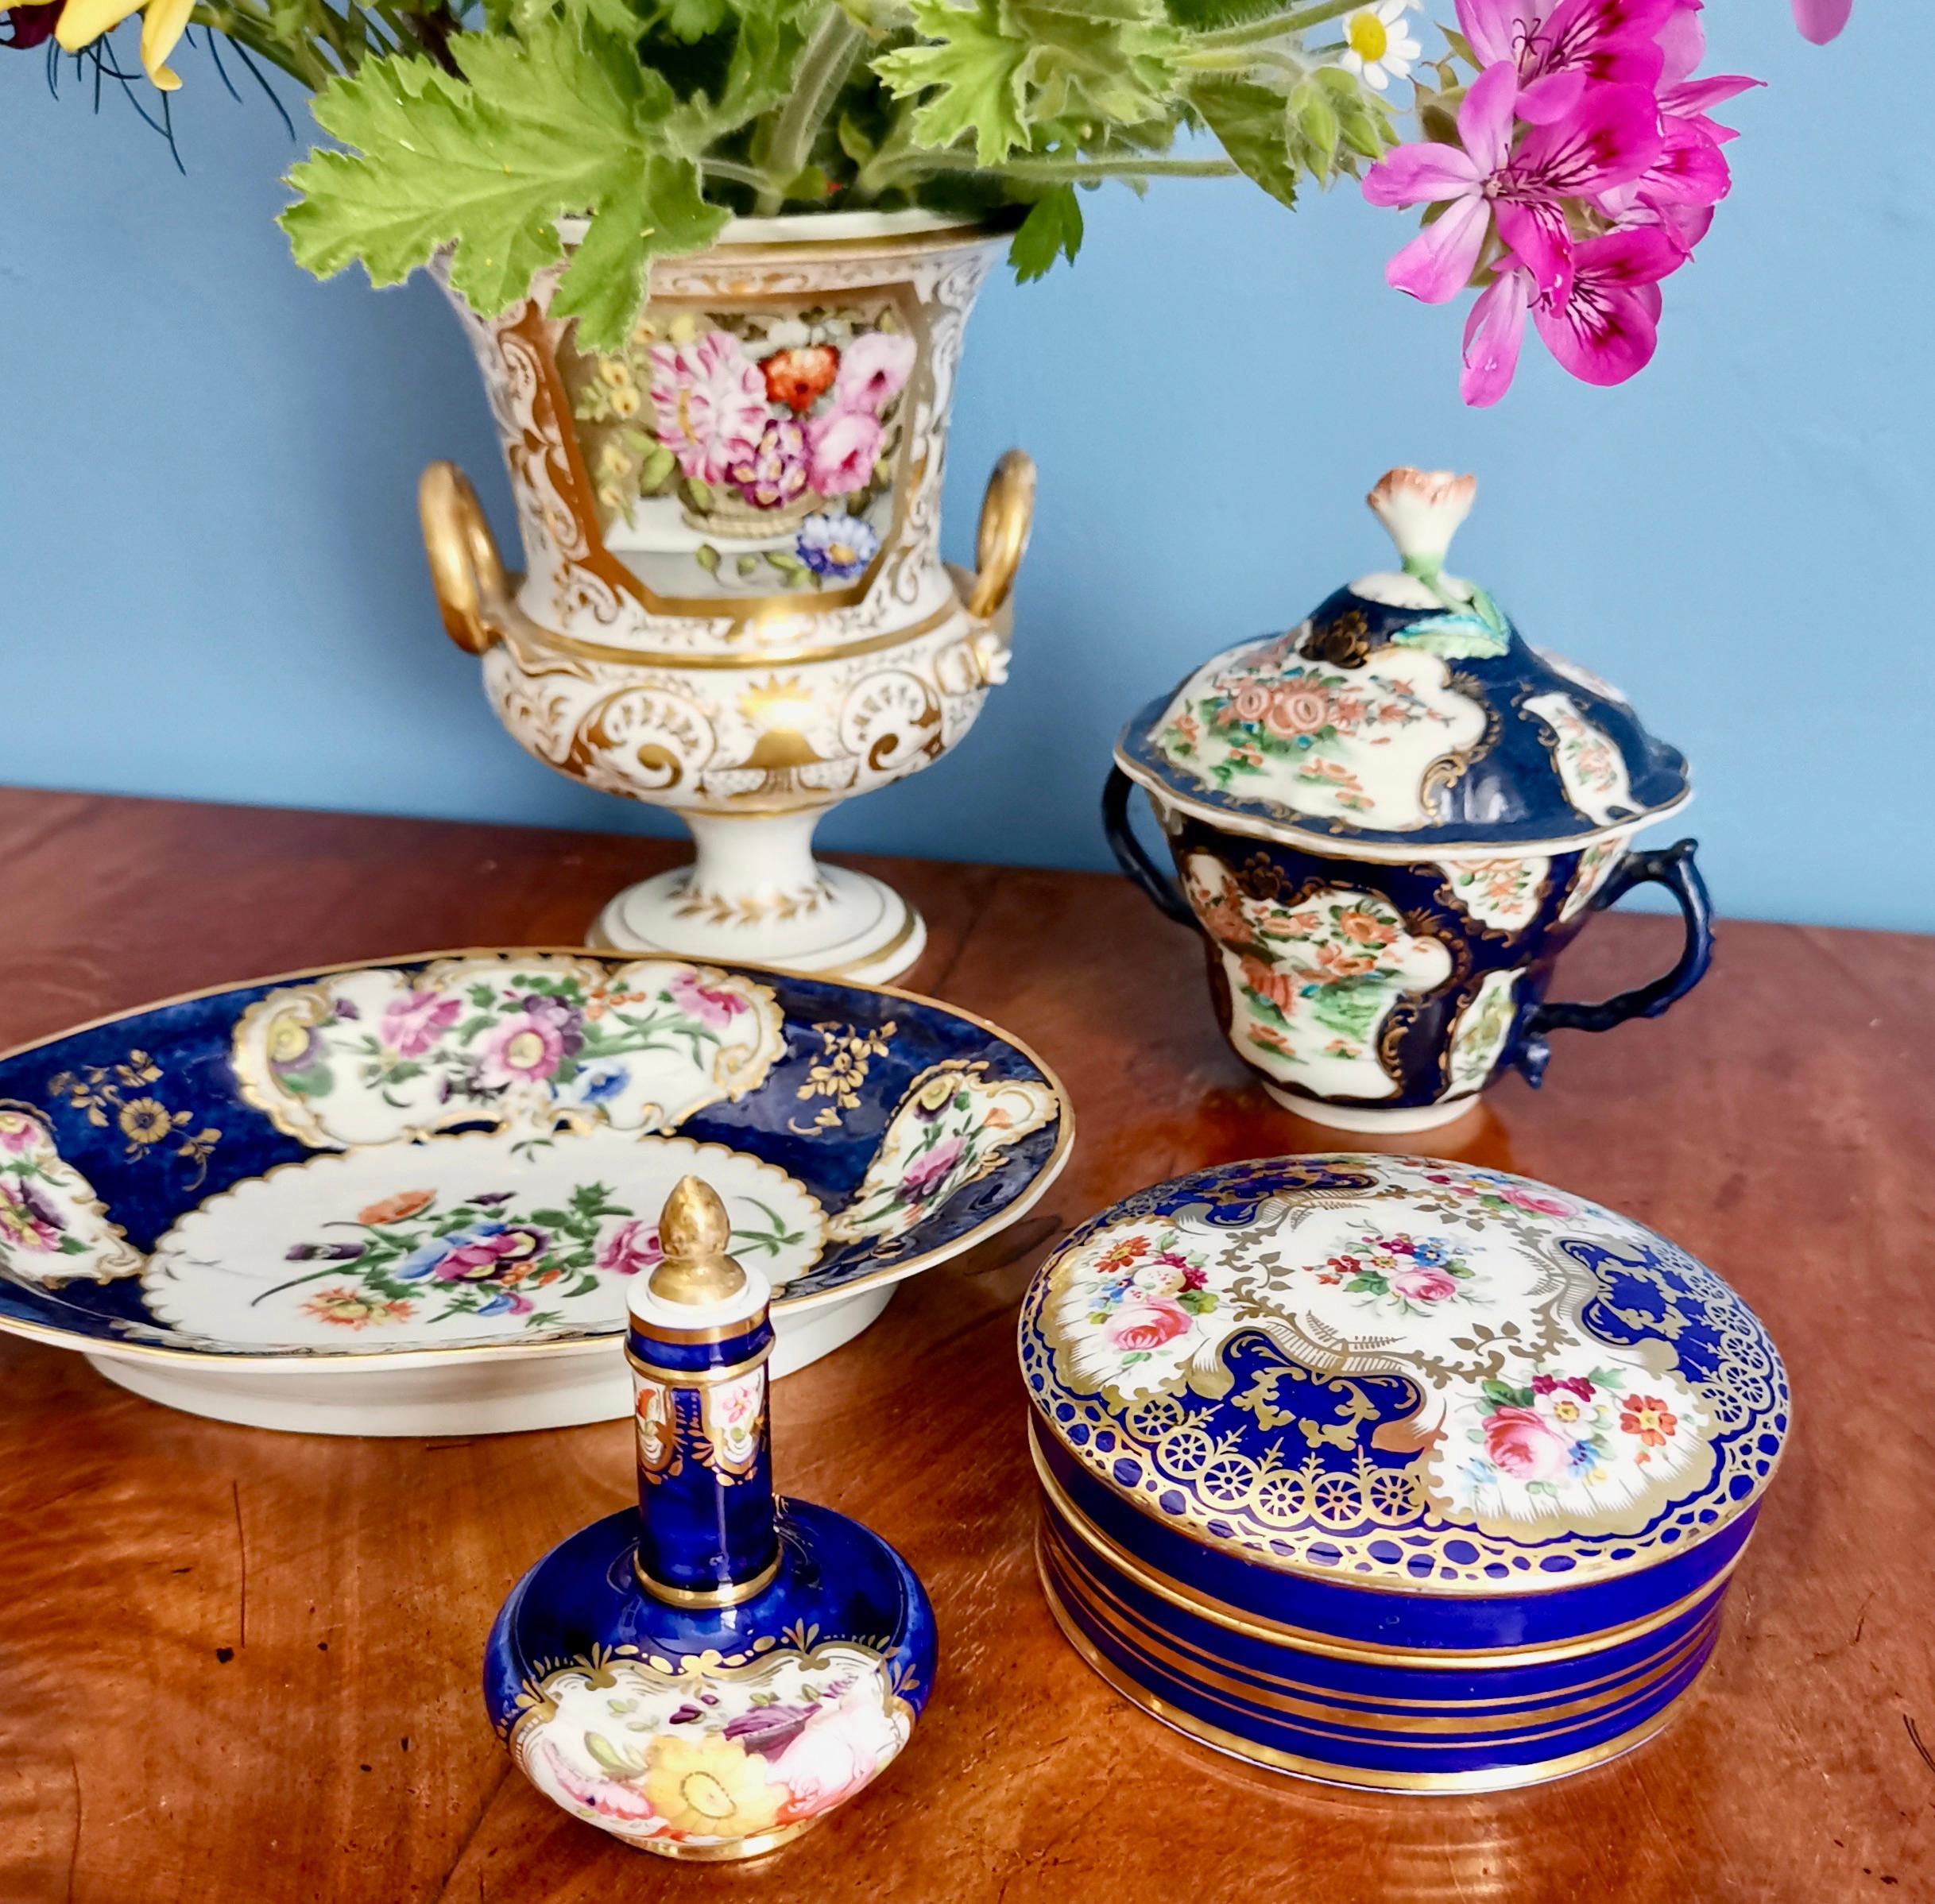 This is a beautiful porcelain powder box made by Coalport in circa 1880, which was the Victorian era. The box has a deep cobalt blue ground with stunning flowers and gilding.

Coalport was one of the leading potters in 19th and 20th century